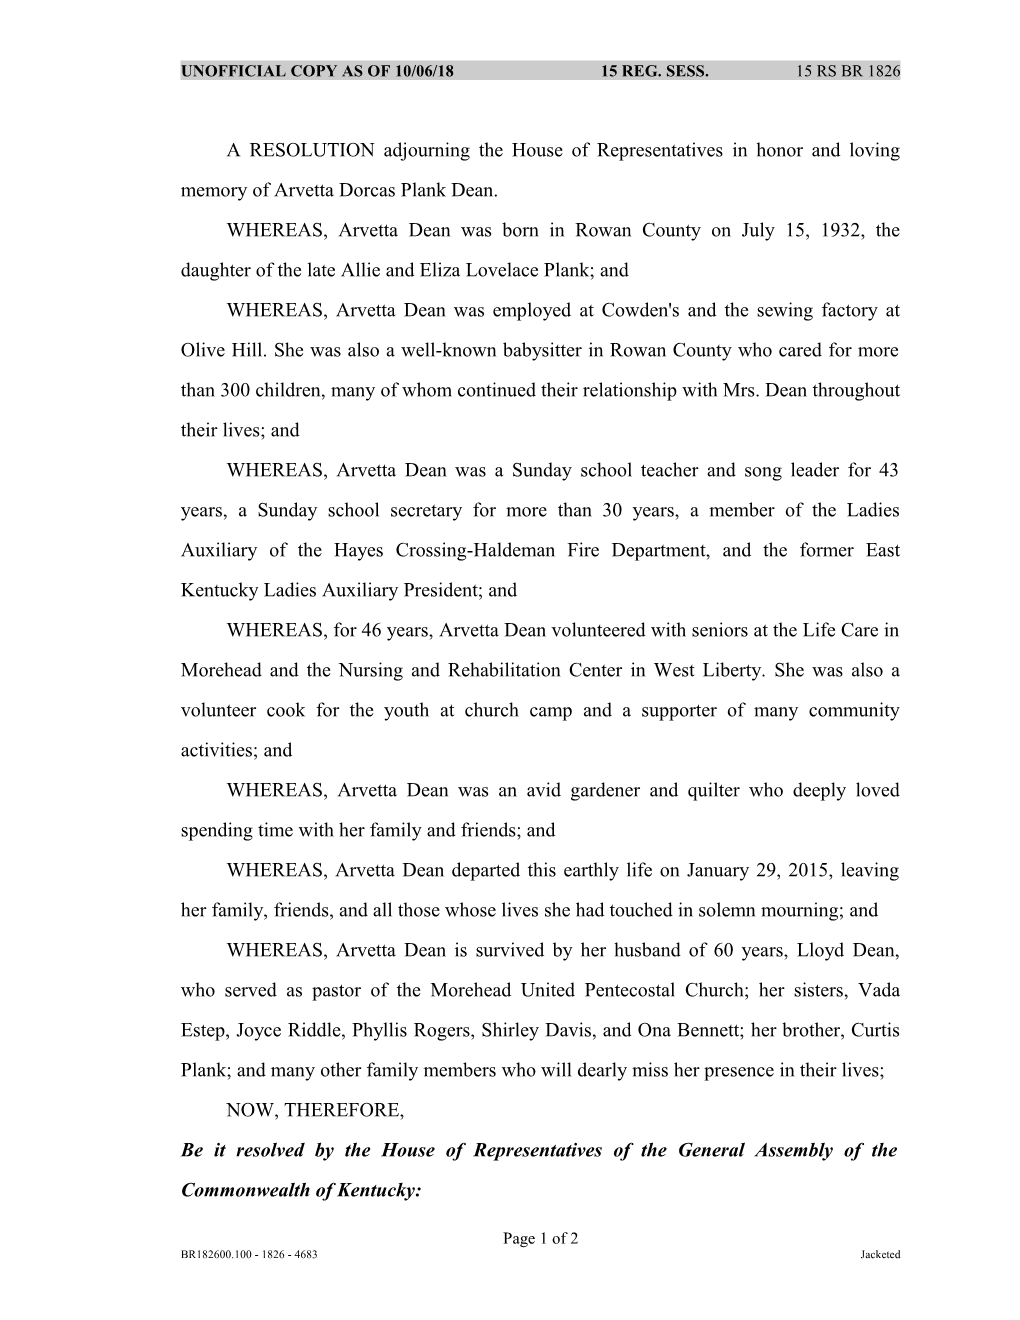 A RESOLUTION Adjourning the House of Representatives in Honor and Loving Memory of Arvetta